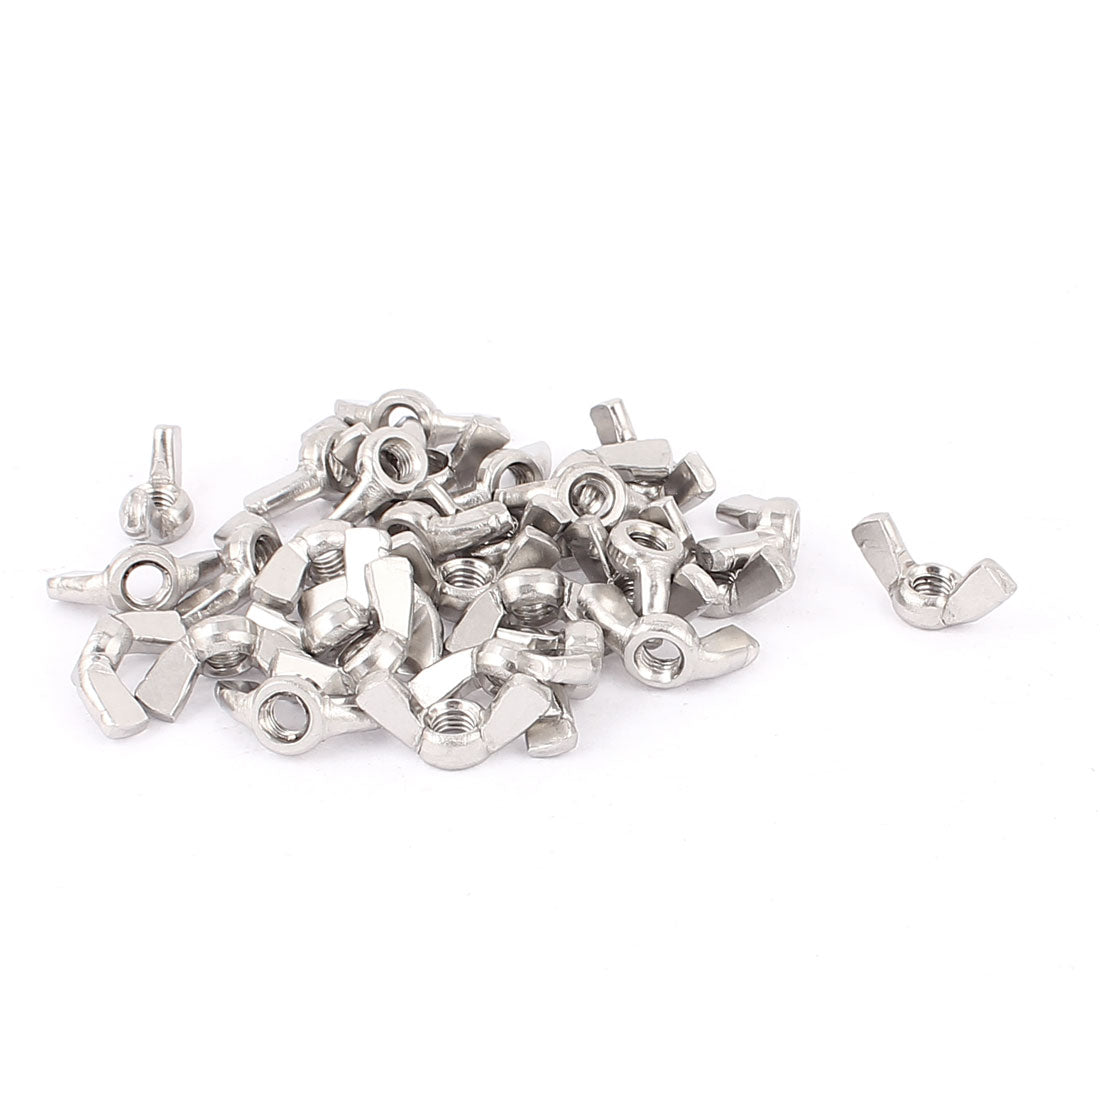 uxcell Uxcell 30pcs 304 Stainless Steel M5 Thread Knob Screw Wing Nut for Rod Clamp